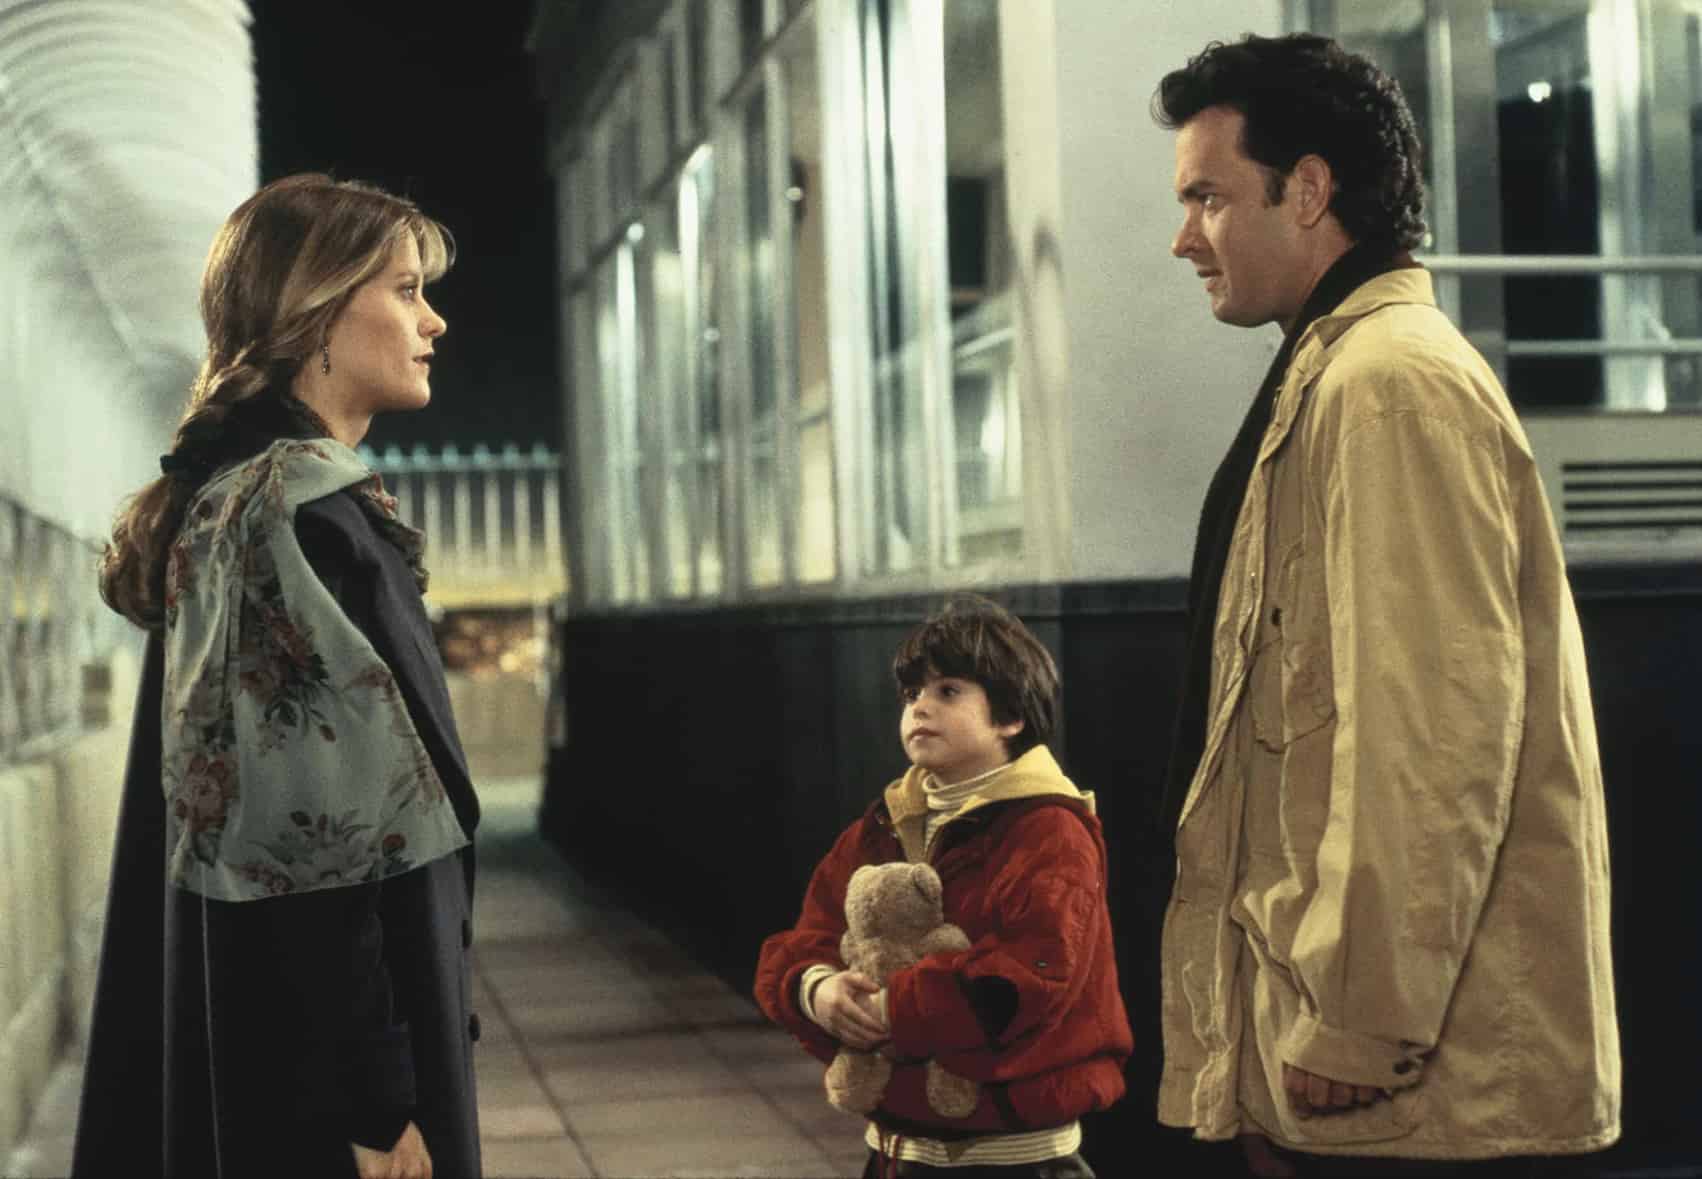 A woman, a young boy holding a teddy bear, and a man stand together in this image from Amazon Prime Video. 